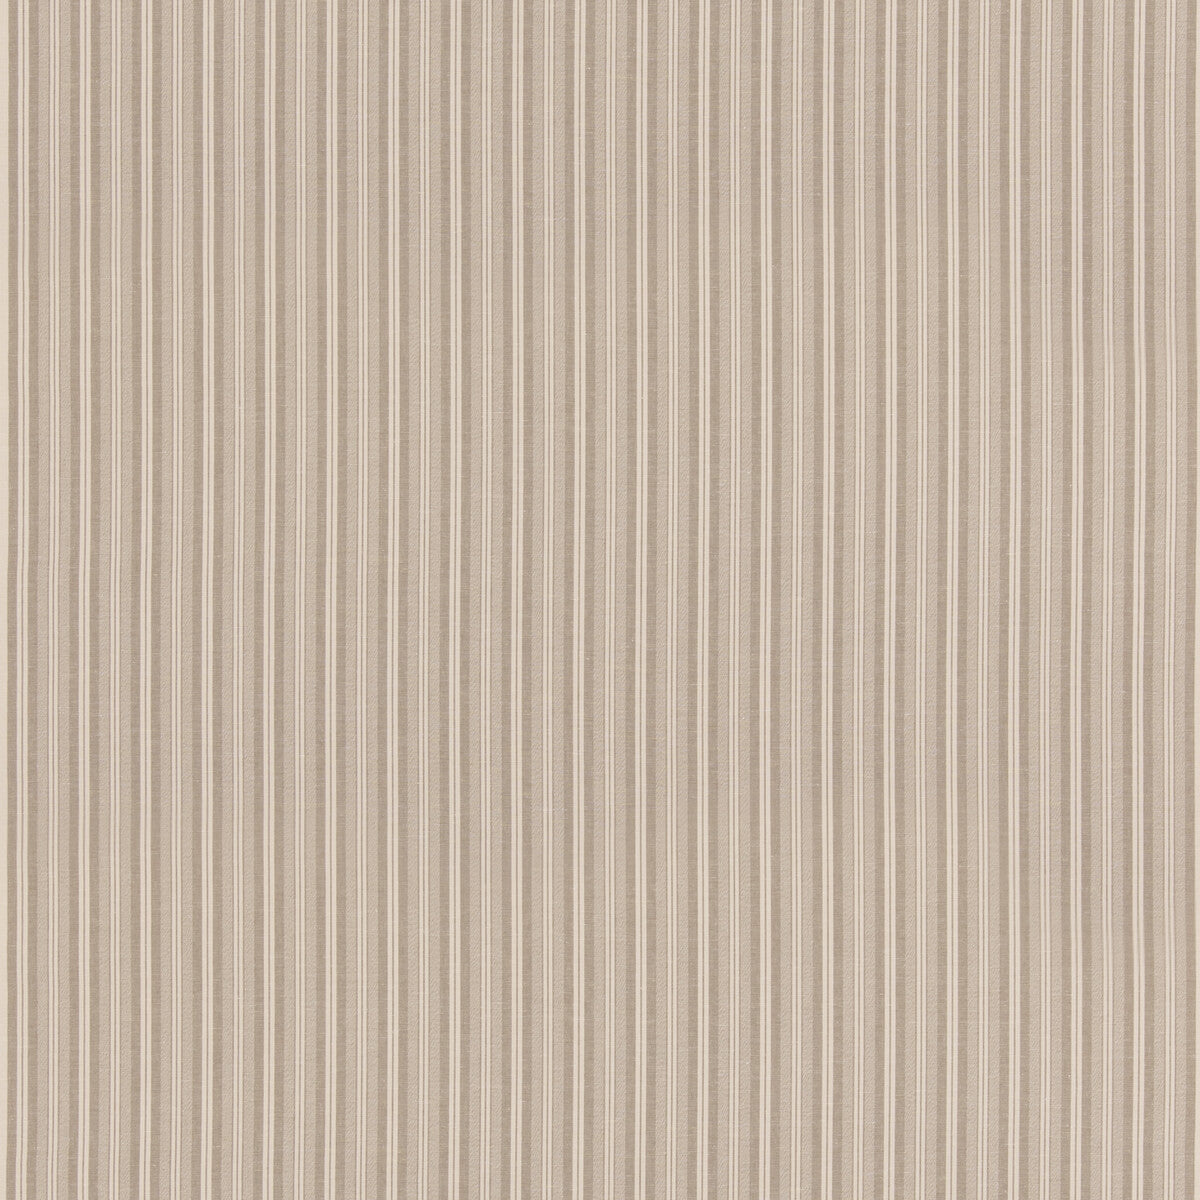 Laverton Stripe fabric in nutmeg color - pattern BF11037.250.0 - by G P &amp; J Baker in the Baker House Plain &amp; Stripe II collection